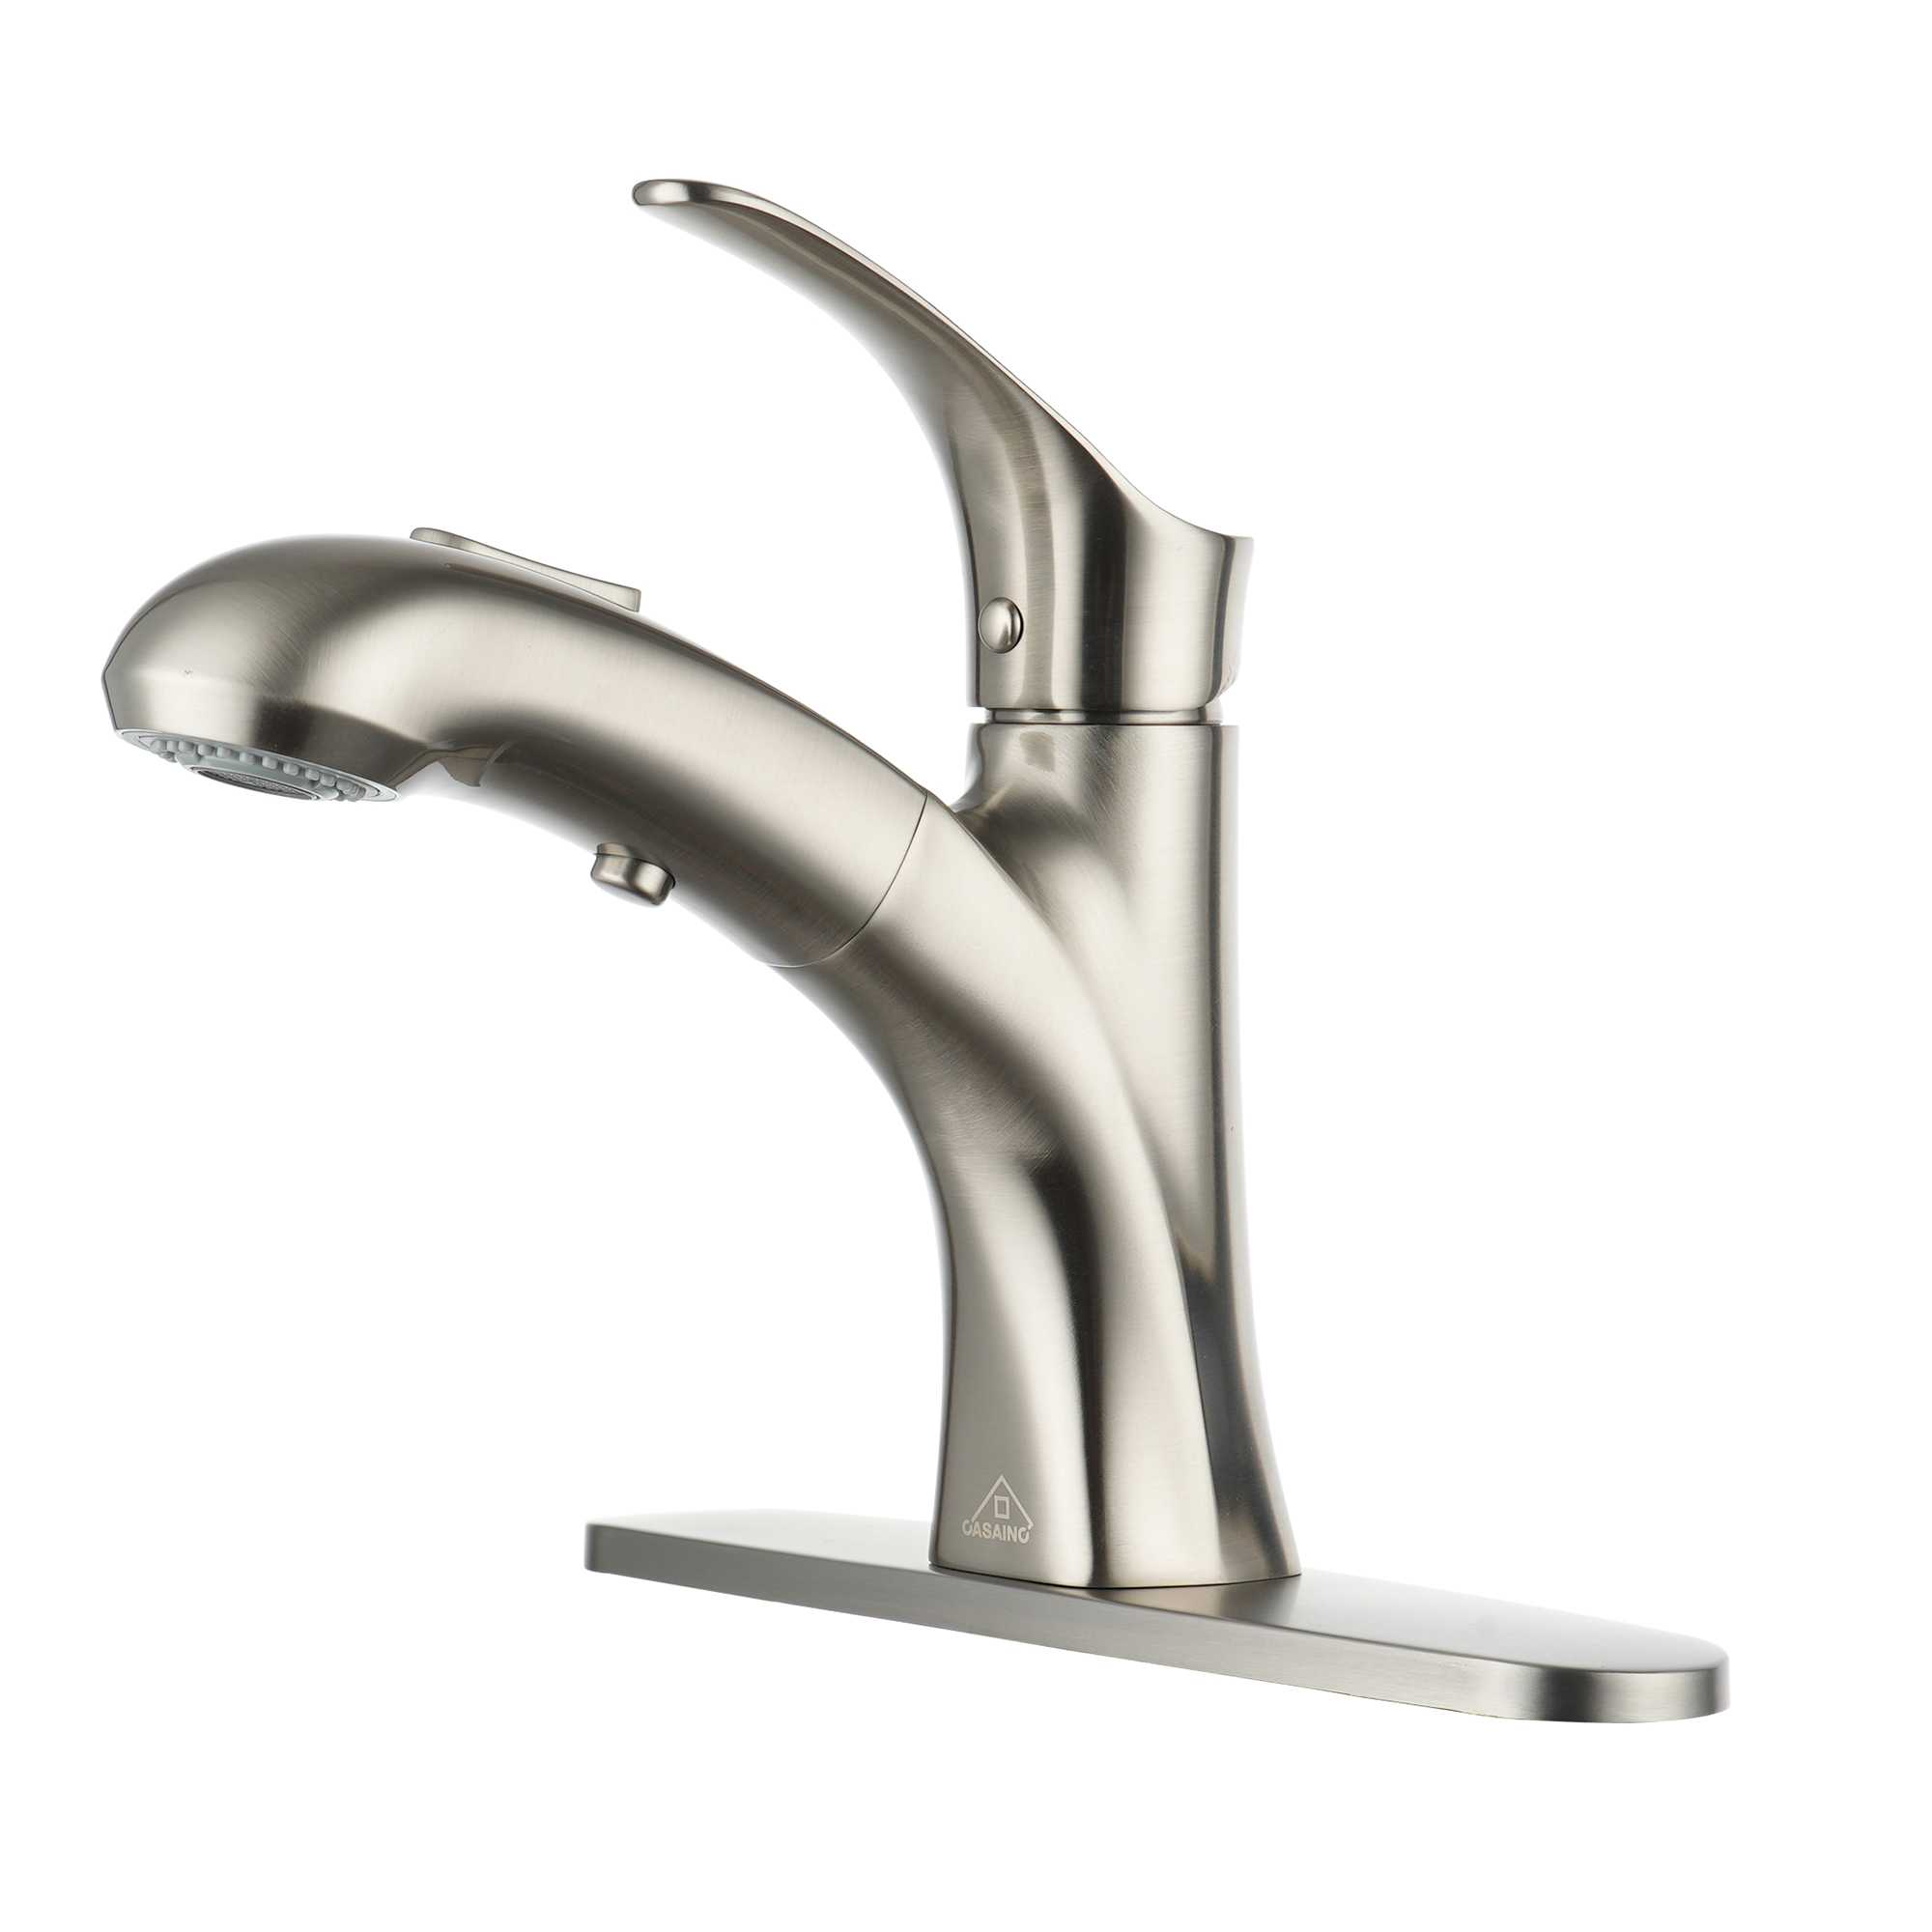 CASAINC Single-Handle Basin Faucet with Pull-Out Sprayer